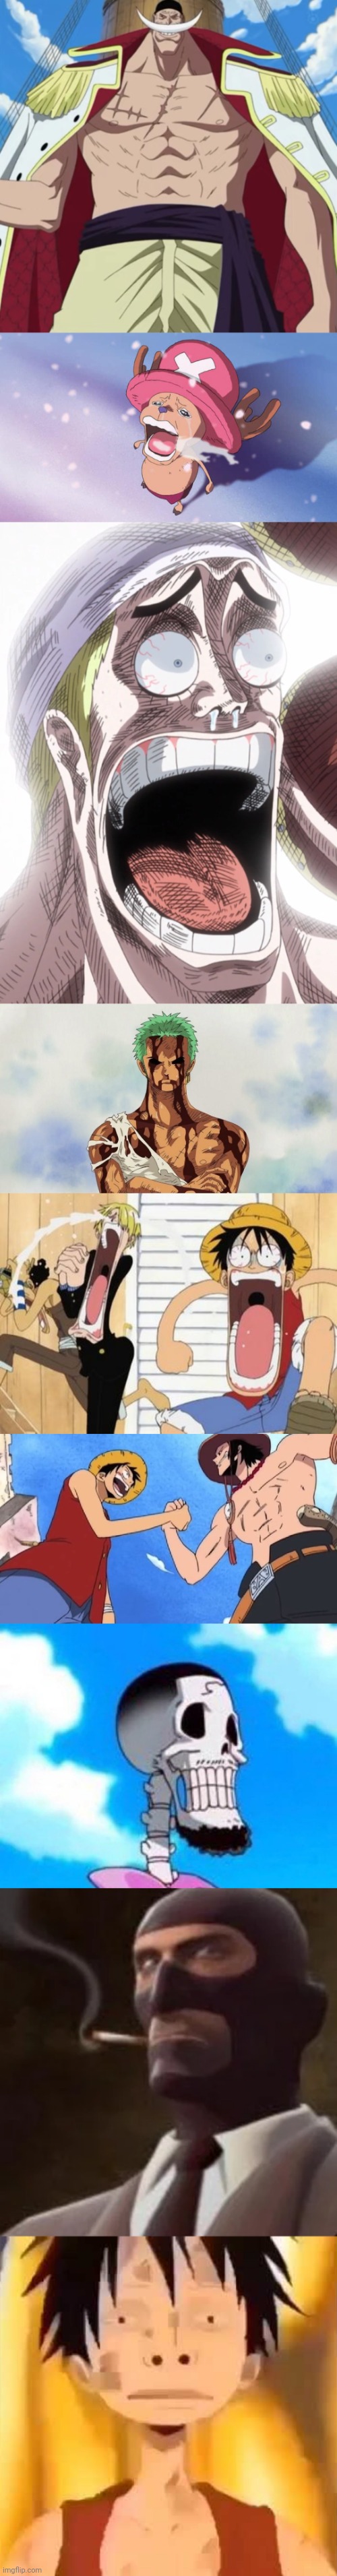 The One Piece is real | image tagged in the one piece is real,crying chopper one piece,one piece enel shocked,zoro,one piece,one piece handshake | made w/ Imgflip meme maker